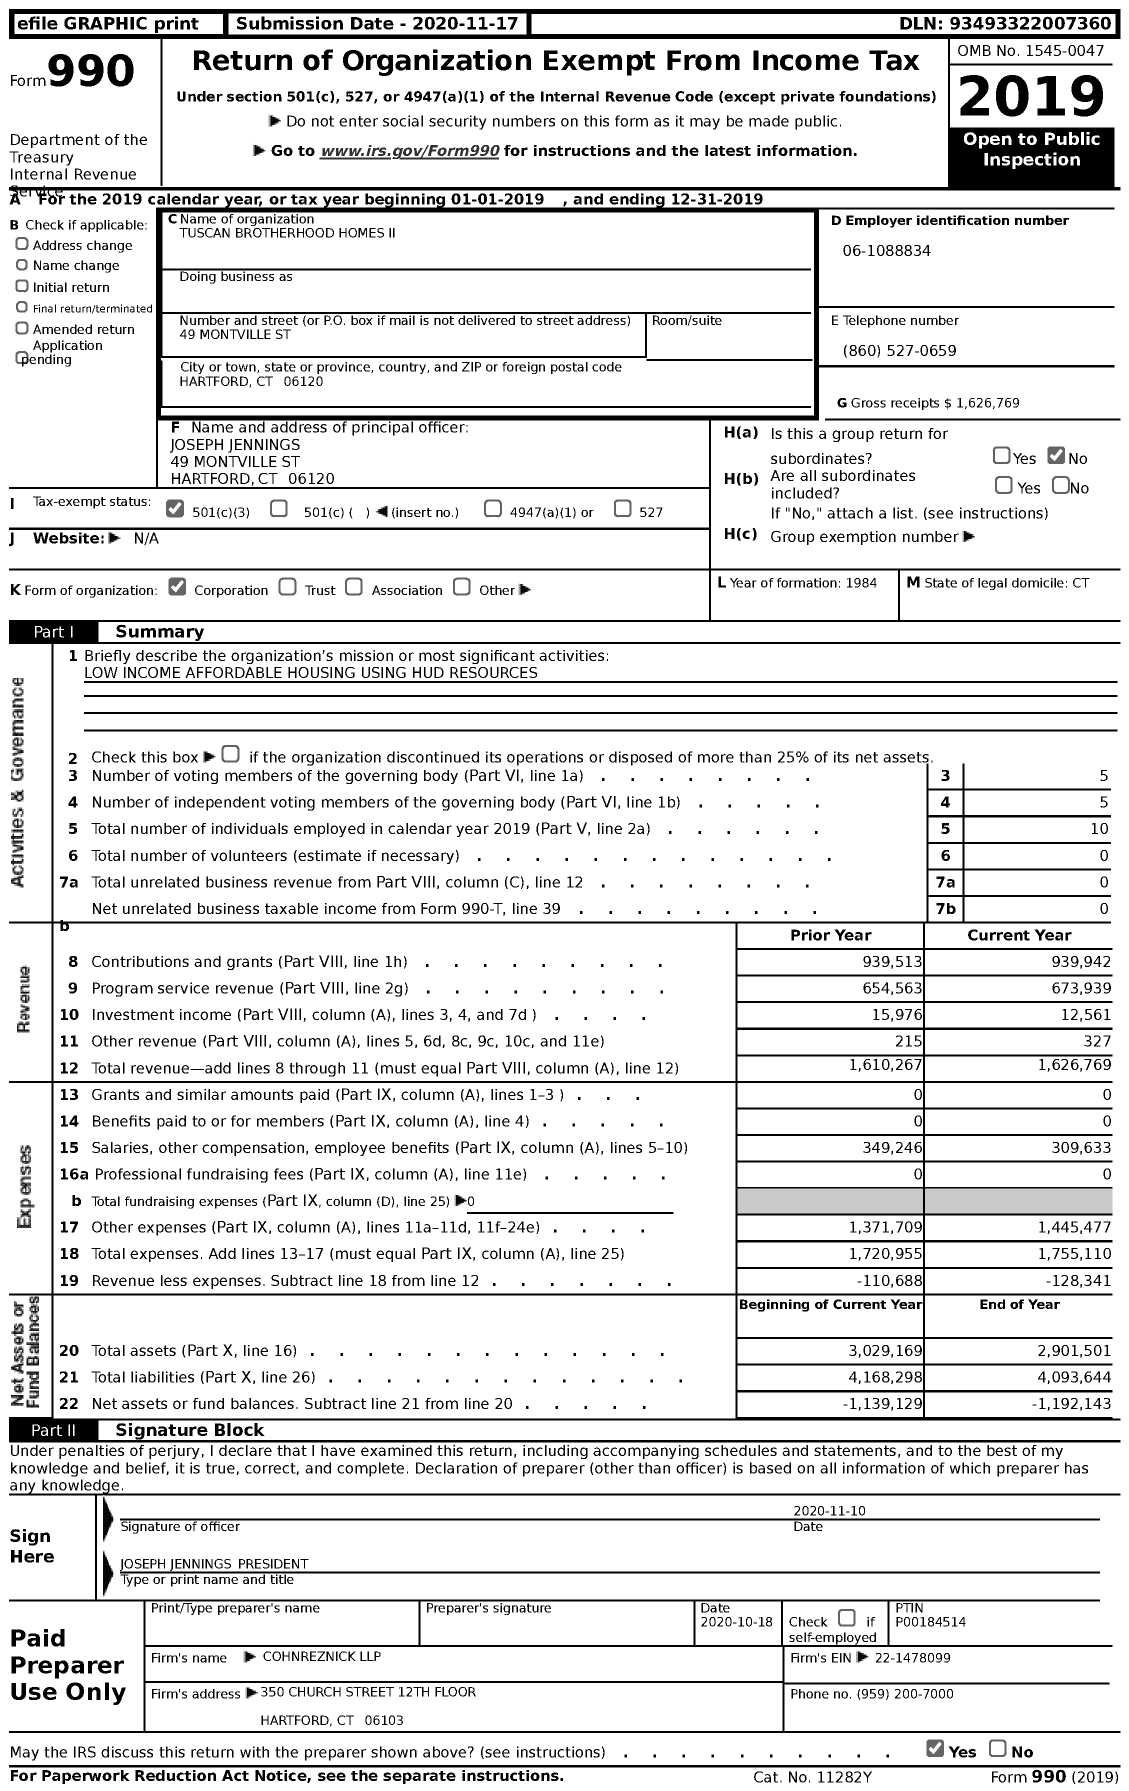 Image of first page of 2019 Form 990 for Tuscan Brotherhood Homes II